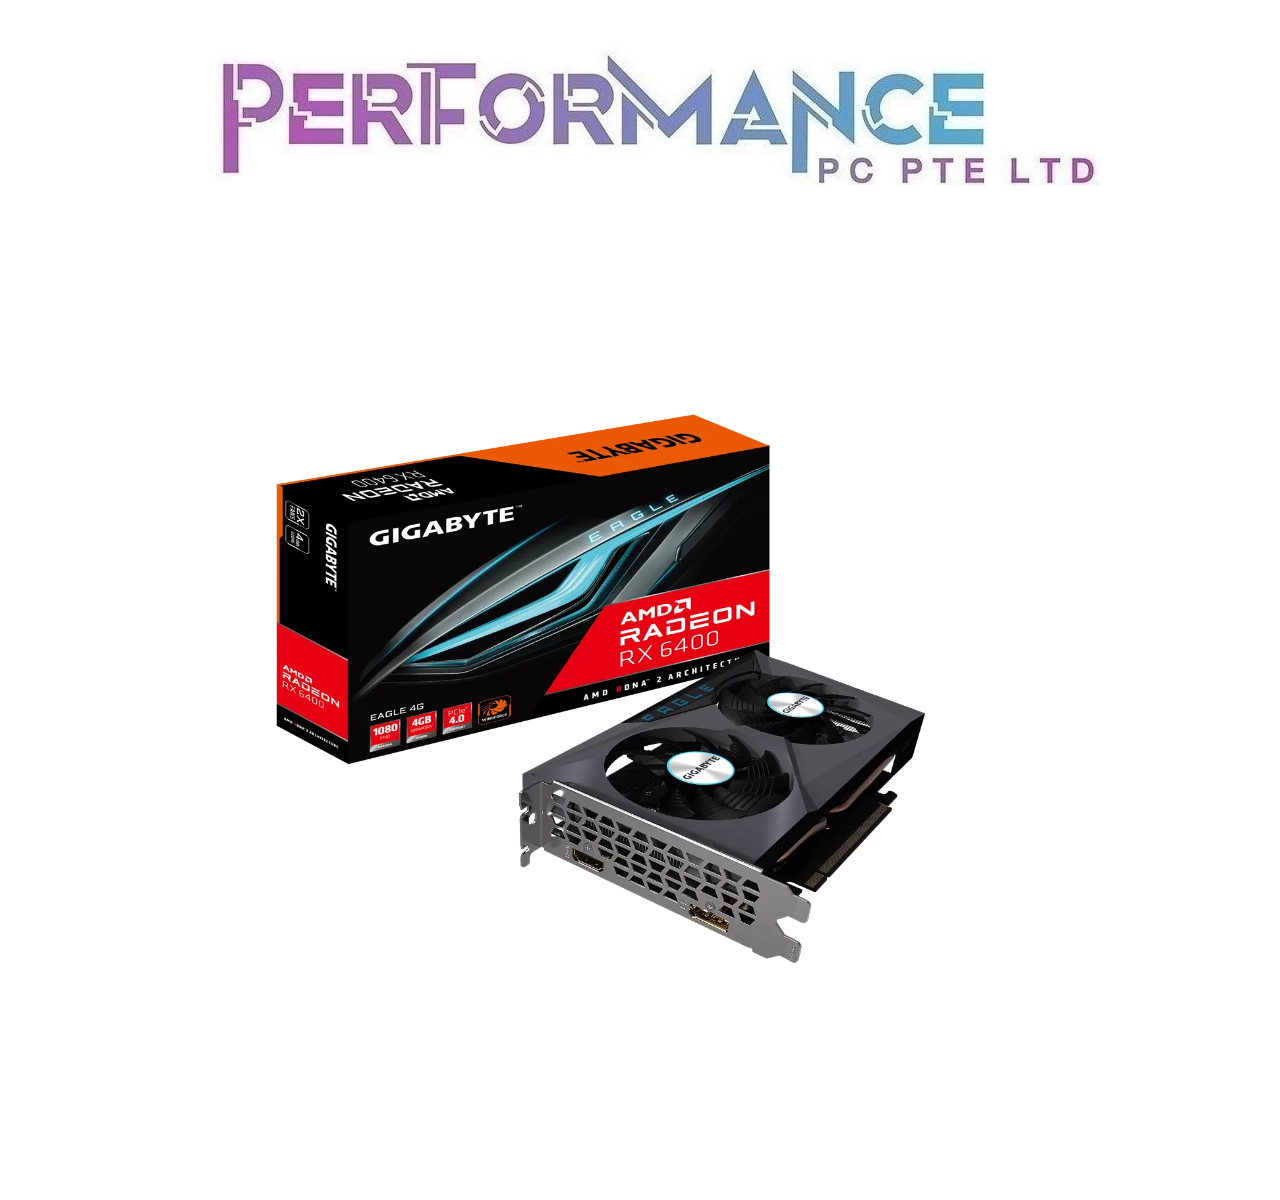 GIGABYTE  Radeon RX 6400 RX6400 EAGLE 4G GV R64EAGLE-4GD GRAPHICS CARD (3 YEARS WARRANTY BY CDL TRADING PTE LTD)